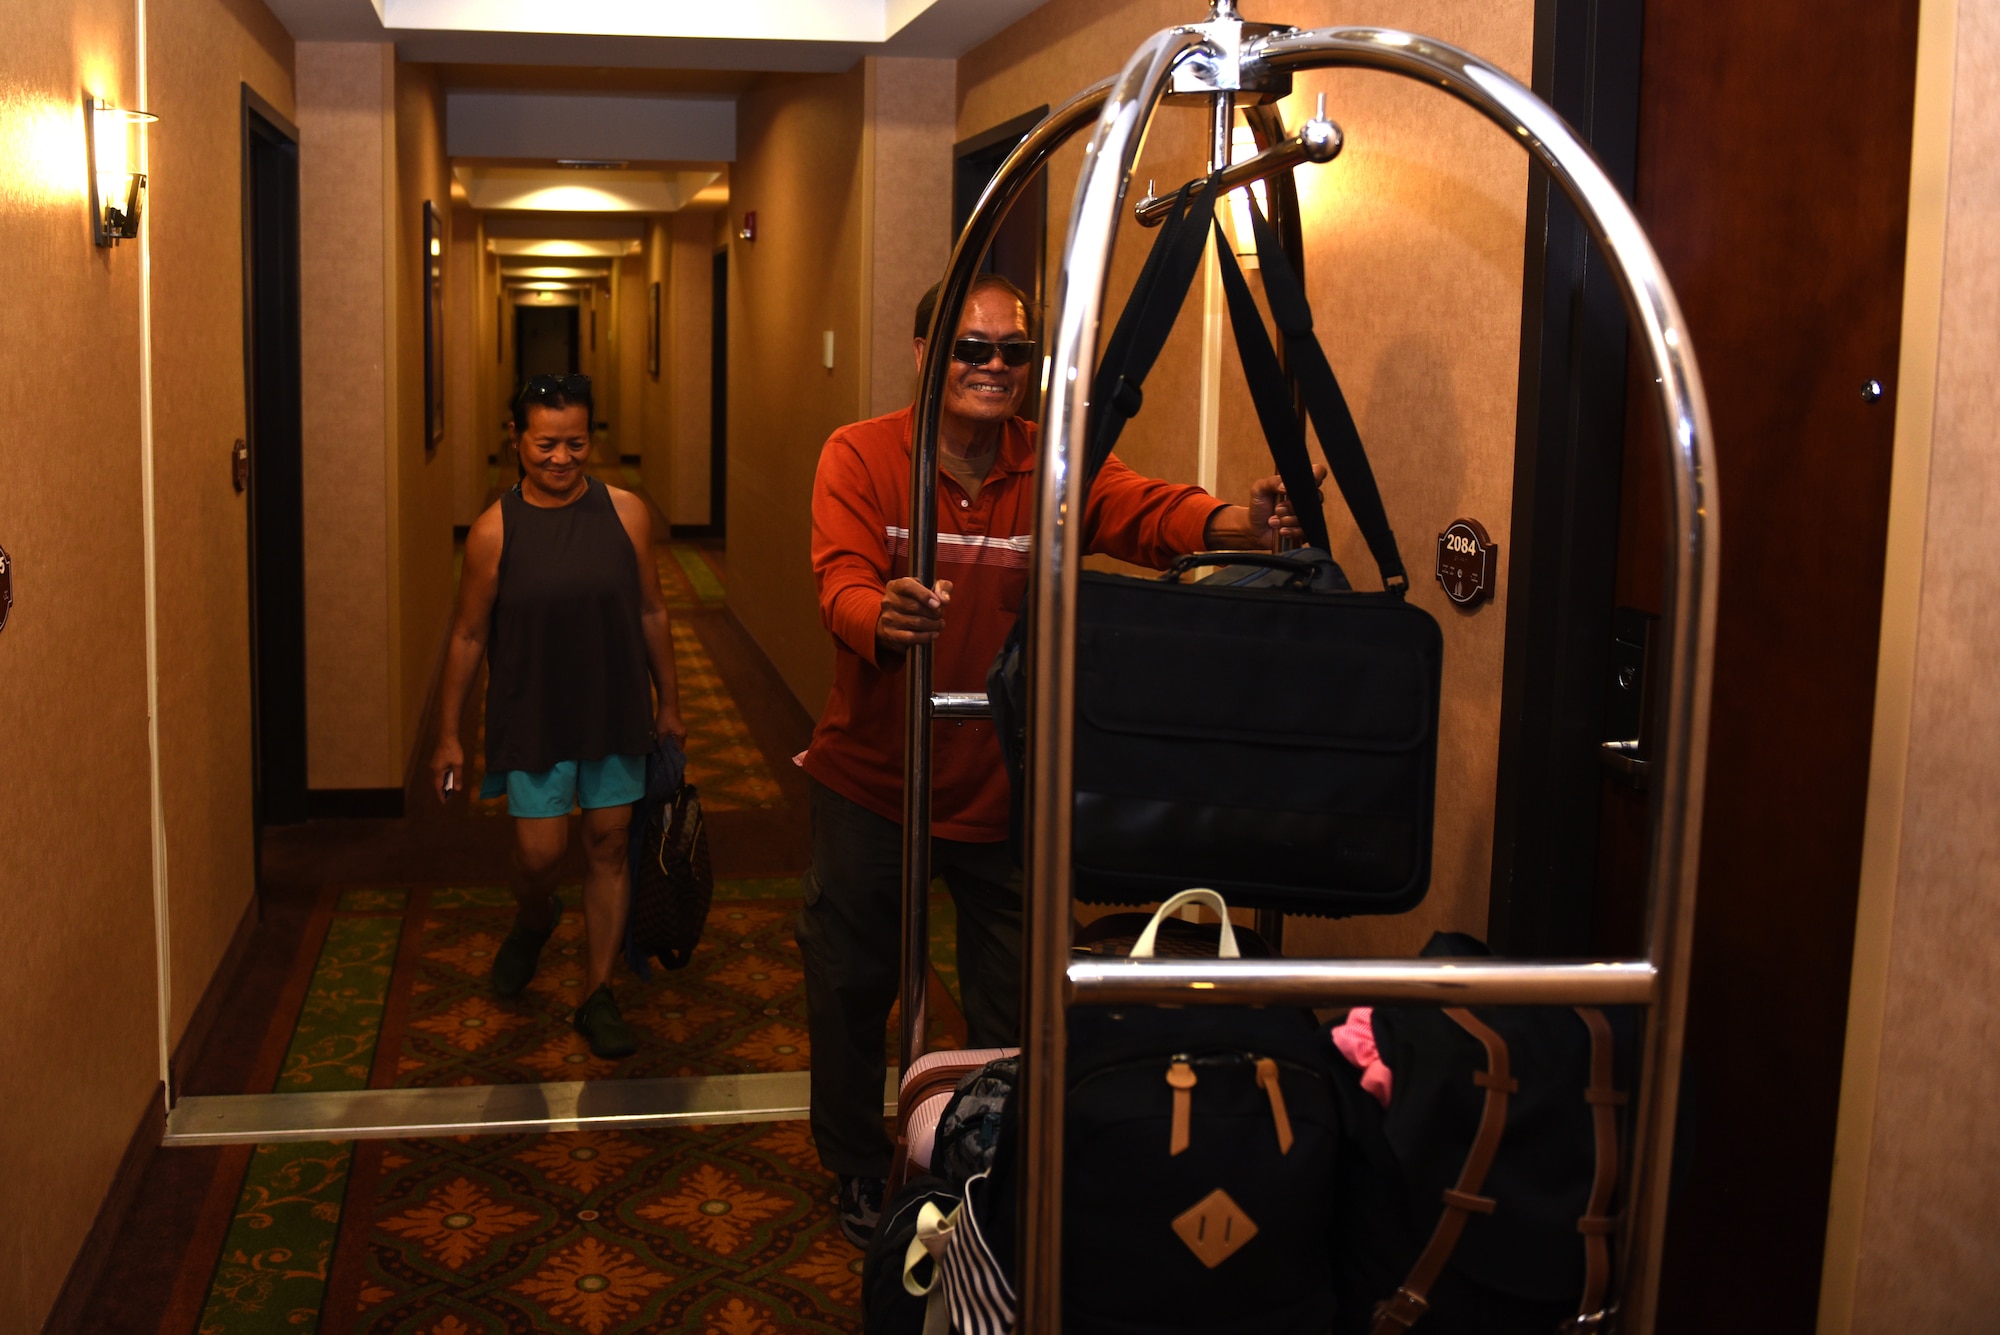 Jose and Angelita Peralta, West Westwind Inn guests, bring their luggage to their room July 8, 2019, at Travis Air Force Base, California. Westwind Inn is one of the finalists for the Air Force’s 2019 Innkeeper Award after being named the best in Air Mobility Command. The Innkeeper Award is an annual honor recognizing excellence in the service’s lodging operations. (U.S. Air Force photo by Airman 1st Class Cameron Otte)